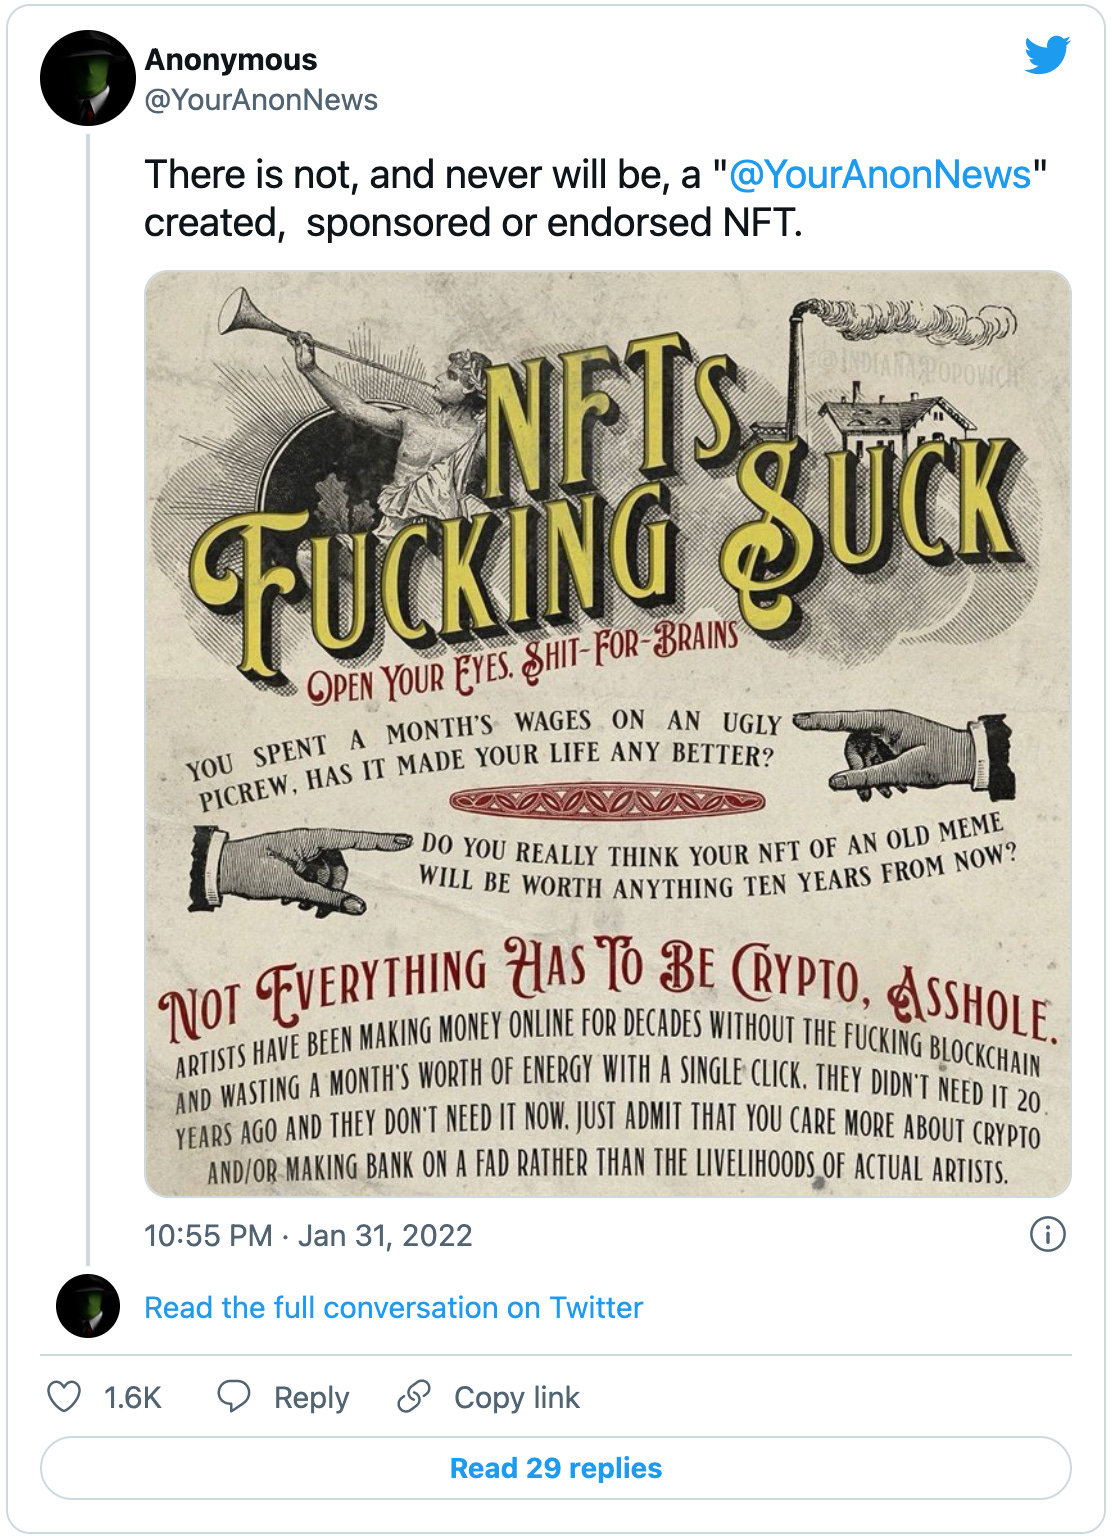 Tweet from @YourAnonNews: “There is not, and never will be, a "@YourAnonNews" created, sponsored or endorsed NFT.” The graphic is like an old-timey public house wall announcement and says “NFTs Fucking Suck” in fancy Edwardian font, with an angel blowing a horn and a factory. The text goes on to say: ”Open Your Eyes, Shit-For-Brains! You spent a month’s wages on an ugly picrew. Has it made your life any better? Do you really think your NFT of an old meme will be worth anything ten years from now?” There’s more but you get it. NFTs are bad. 